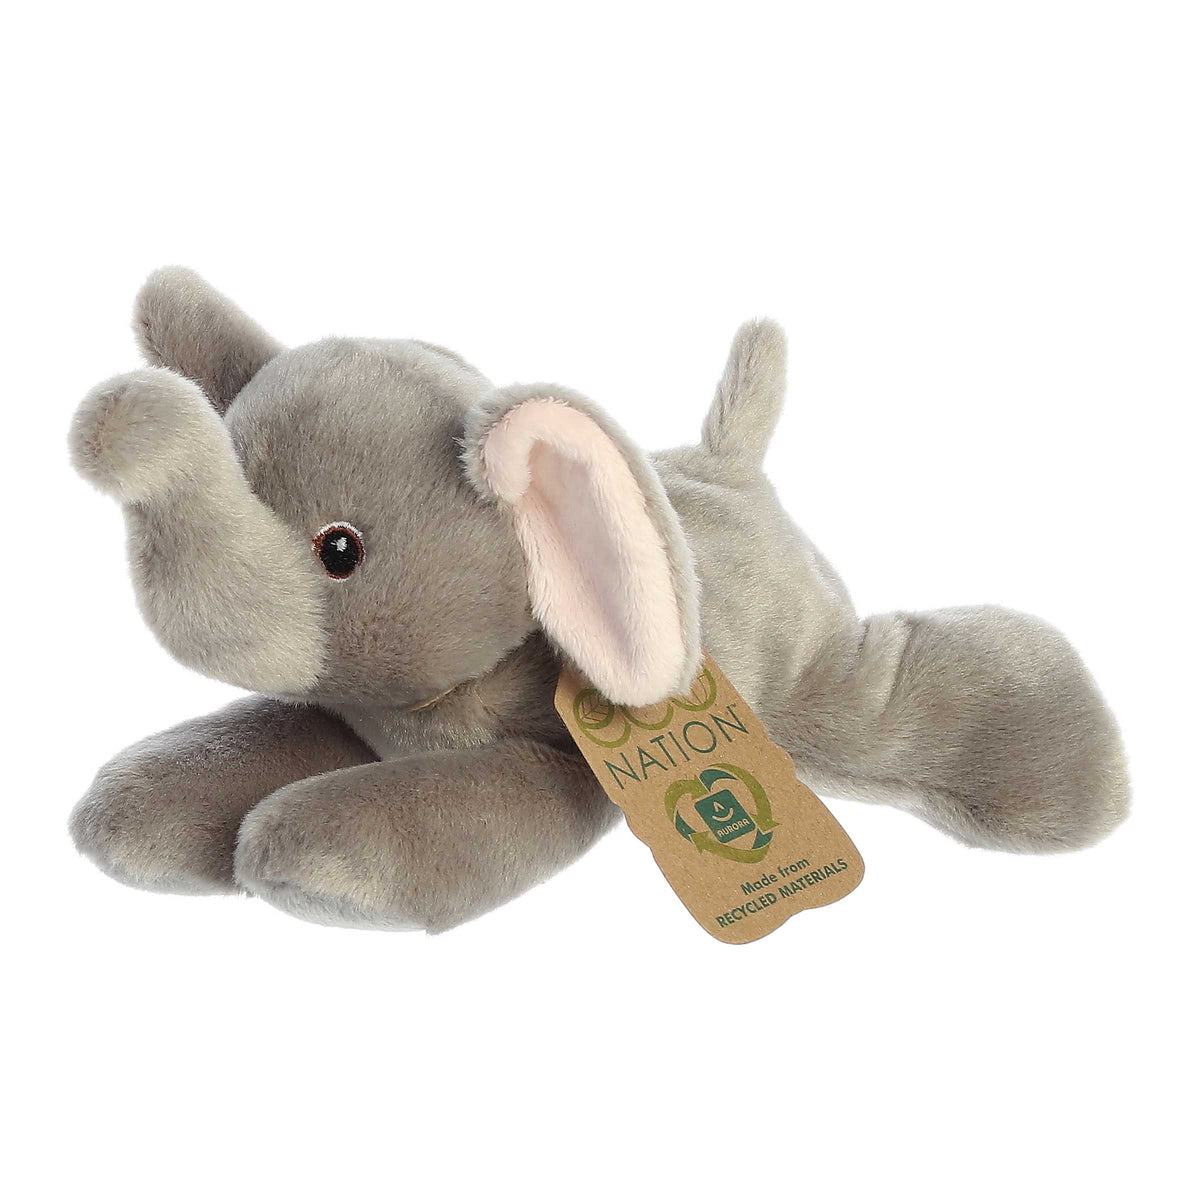 Eco Softie grey Elephant Plush by Aurora with soft fabric made from recycled plastic bottles, featuring the 'Eco Nation' tag.